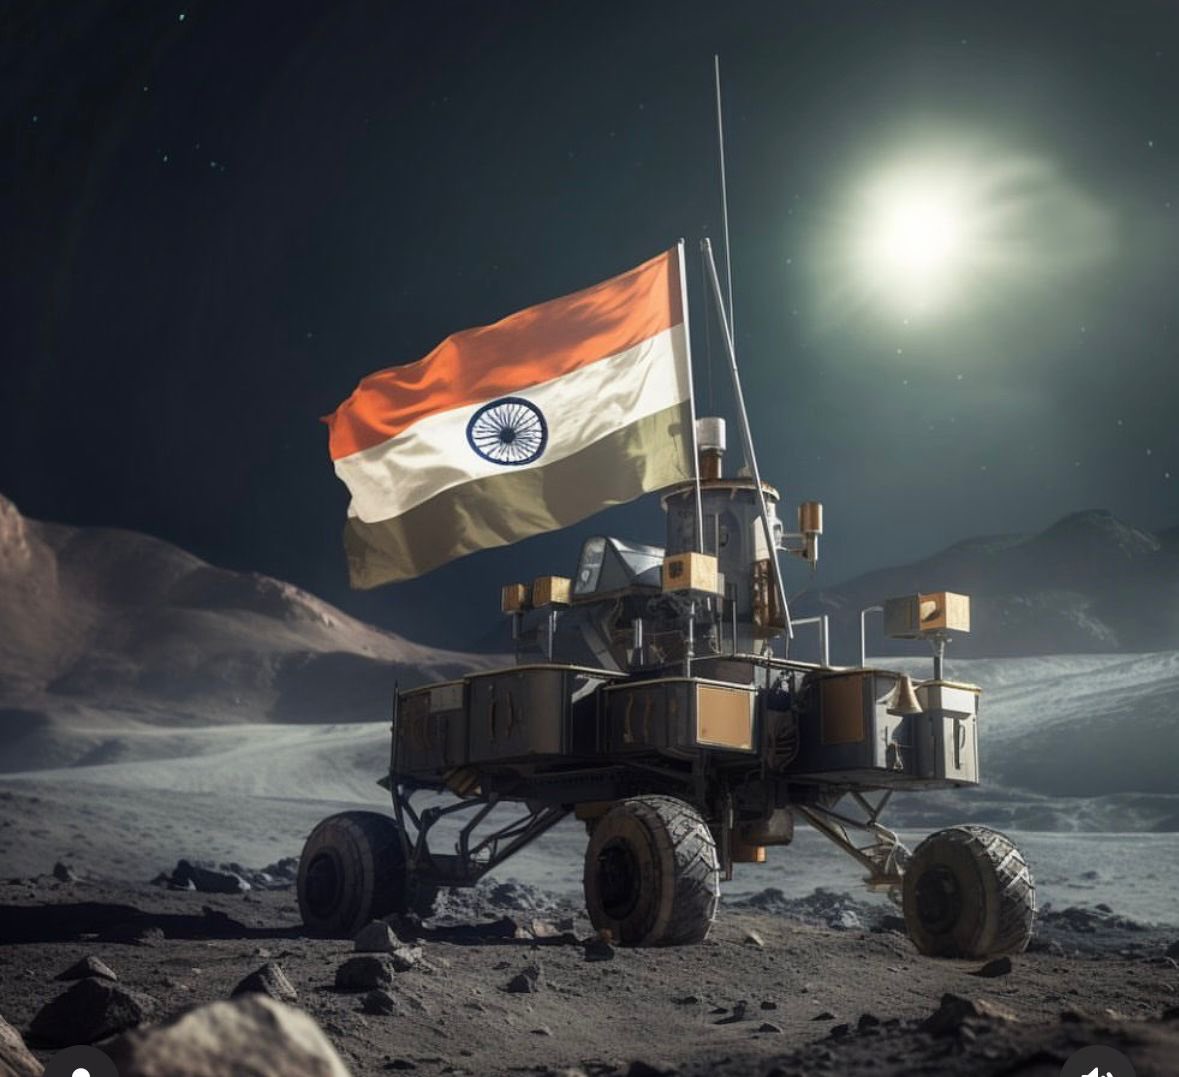 Being a proud Indian,the successful landing of Chandrayaan-3 fills me with immense pride! It showcases the brilliance of our scientists & the unbreakable spirit of our people.Let's keep reaching for the stars and making India's presence shine worldwide.Jai Hind! 🇮🇳 #Chandrayaan3